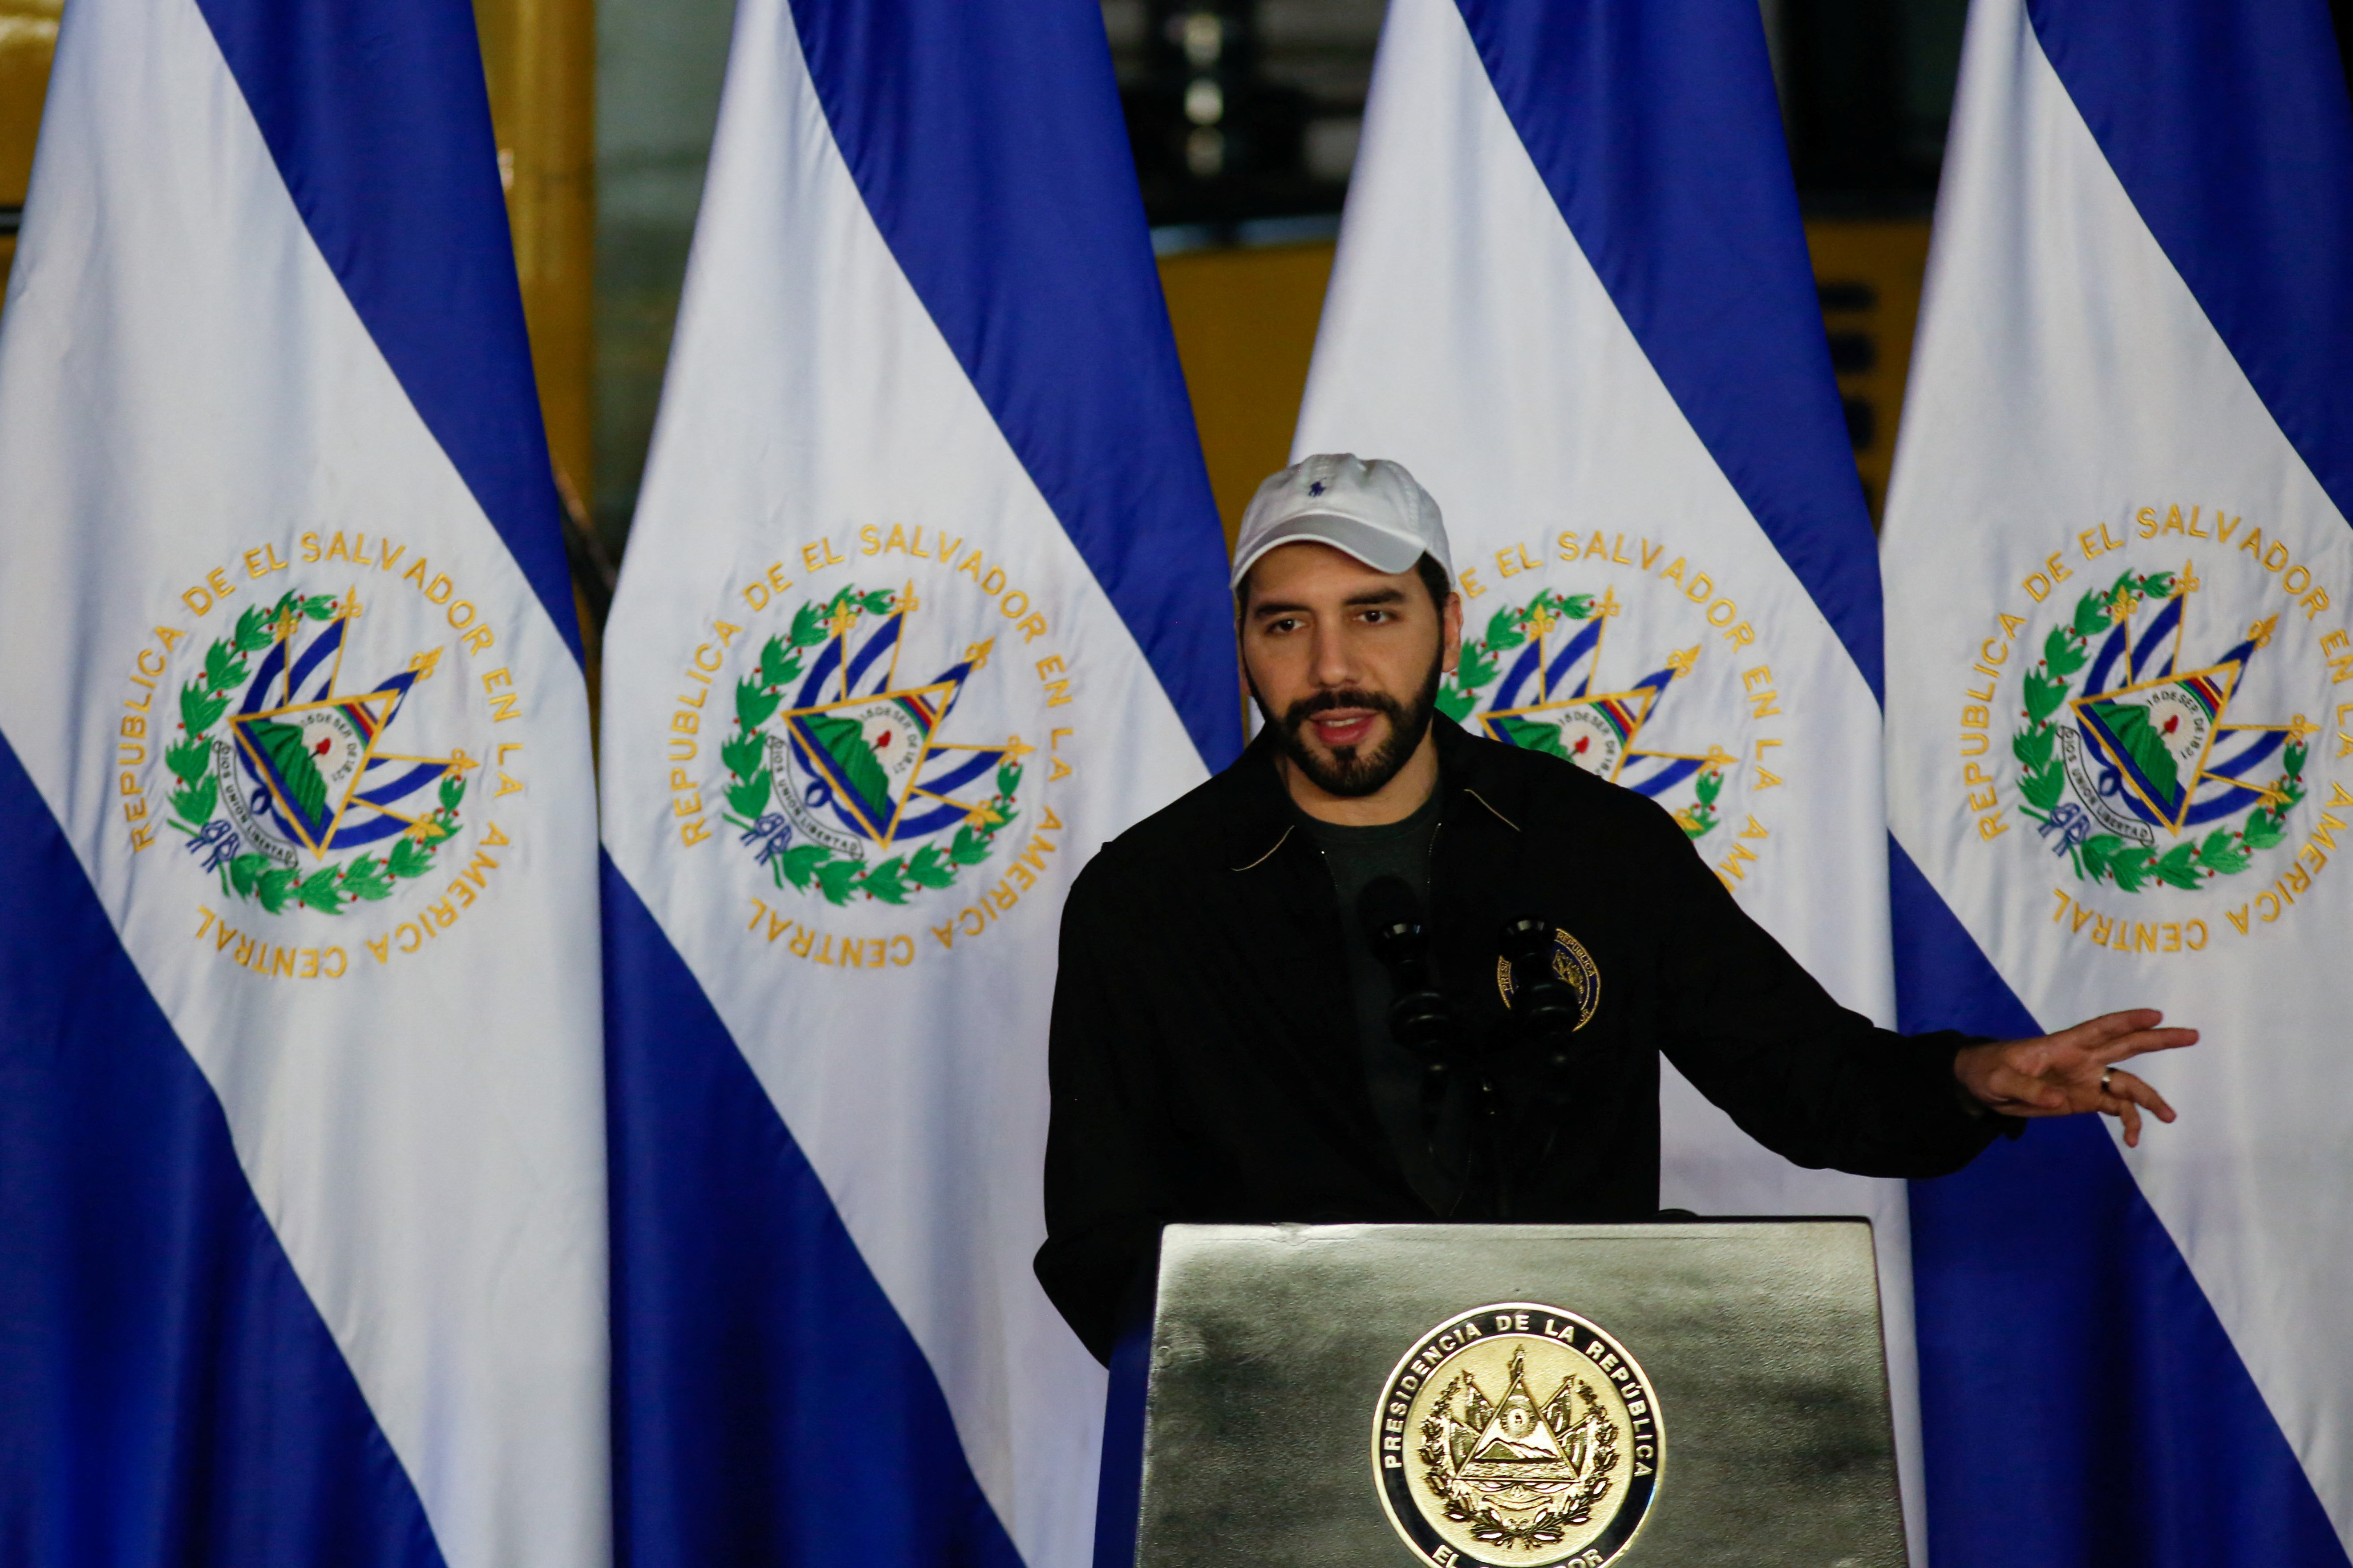 El Salvador's President Nayib Bukele speaks during a ceremony to lay the first stone of Chivo Vet, a veterinary hospital financed with the gains El Salvador has obtained from its bitcoin operations, in Antiguo Cuscatlan, El Salvador November 1, 2021. REUTERS/Jose Cabezas